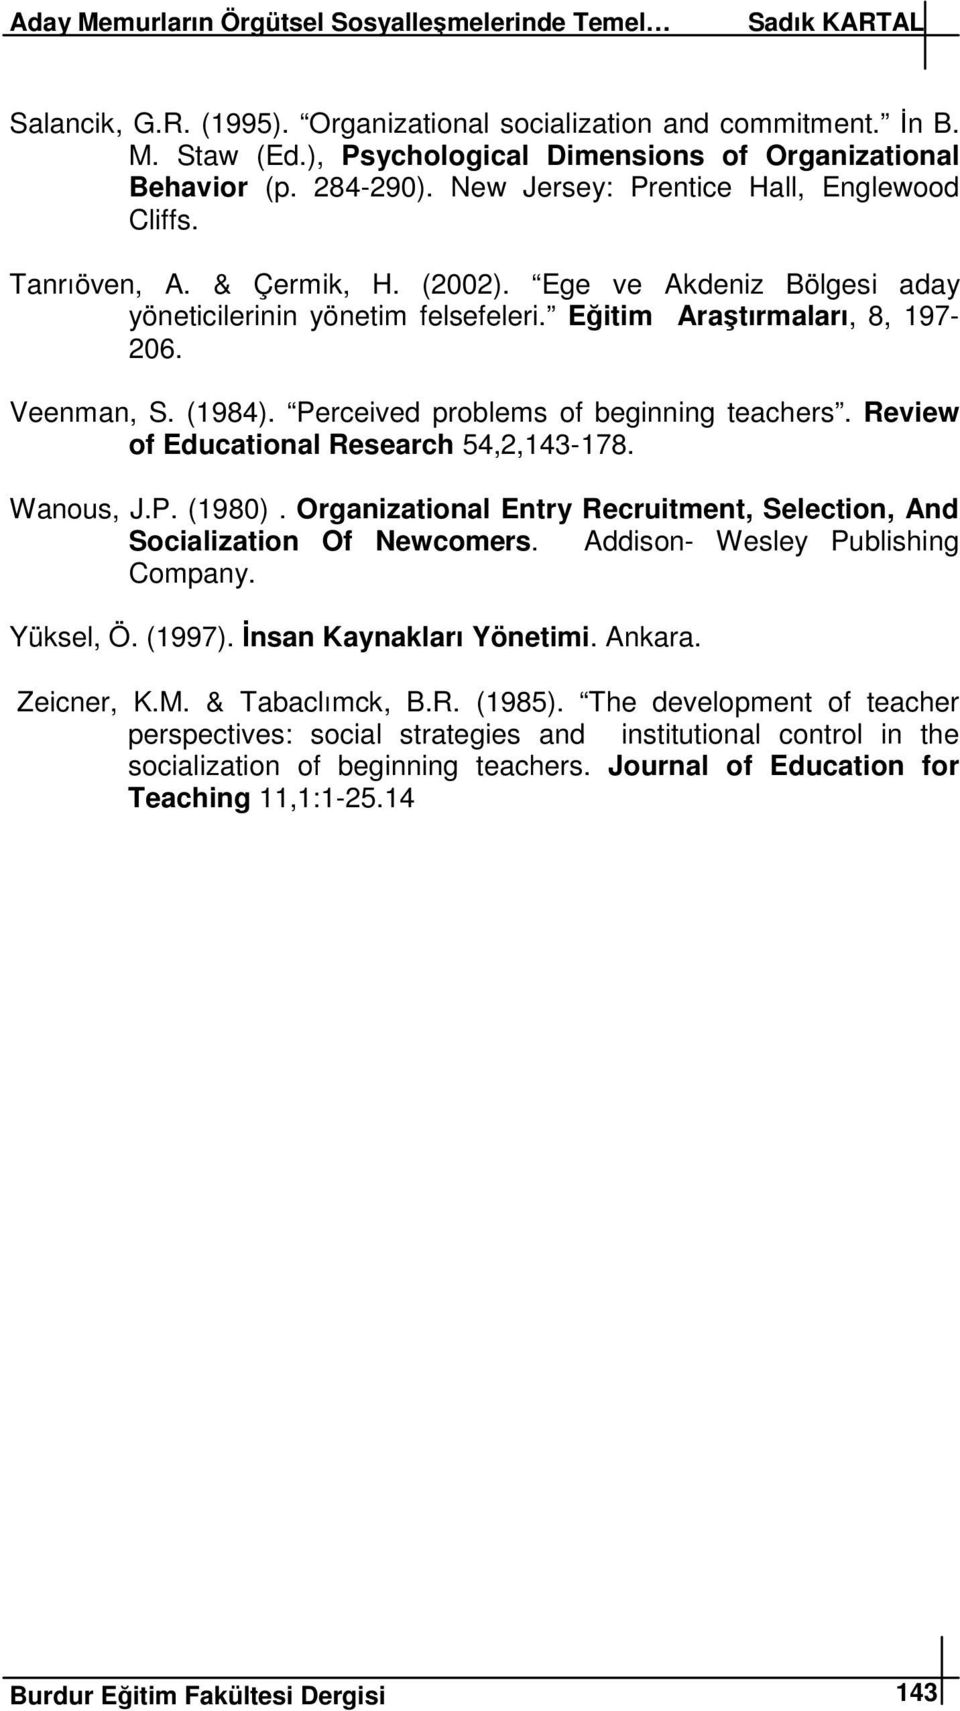 Review of Educational Research 54,2,143-178. Wanous, J.P. (1980). Organizational Entry Recruitment, Selection, And Socialization Of Newcomers. Addison- Wesley Publishing Company. Yüksel, Ö. (1997).